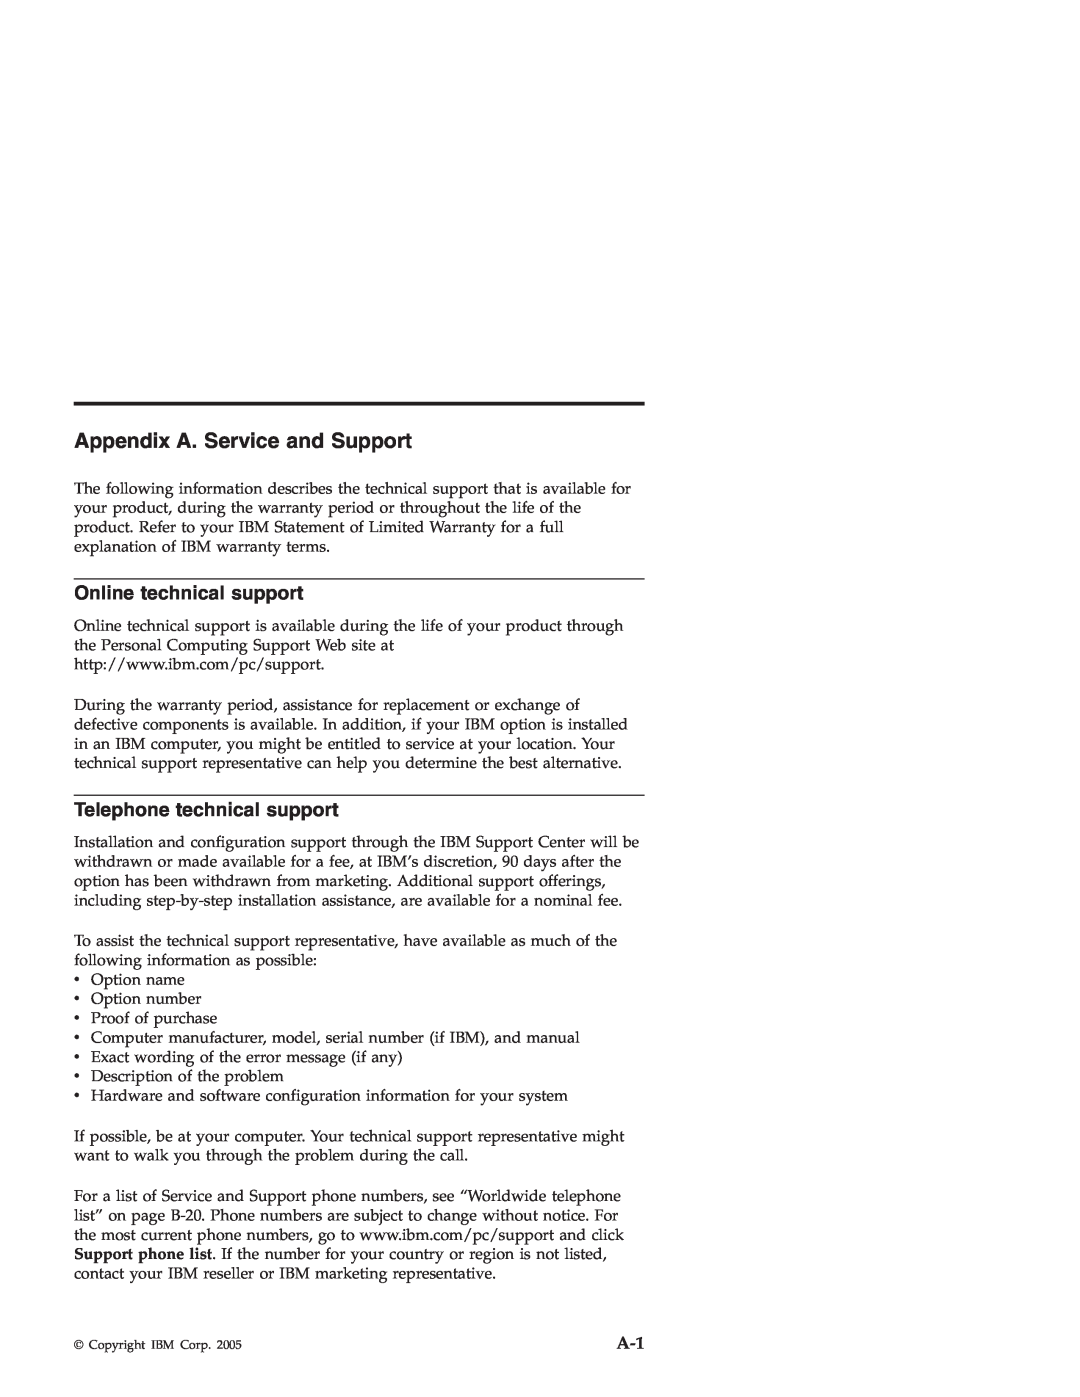 IBM X4 manual Appendix A. Service and Support, Online technical support, Telephone technical support 